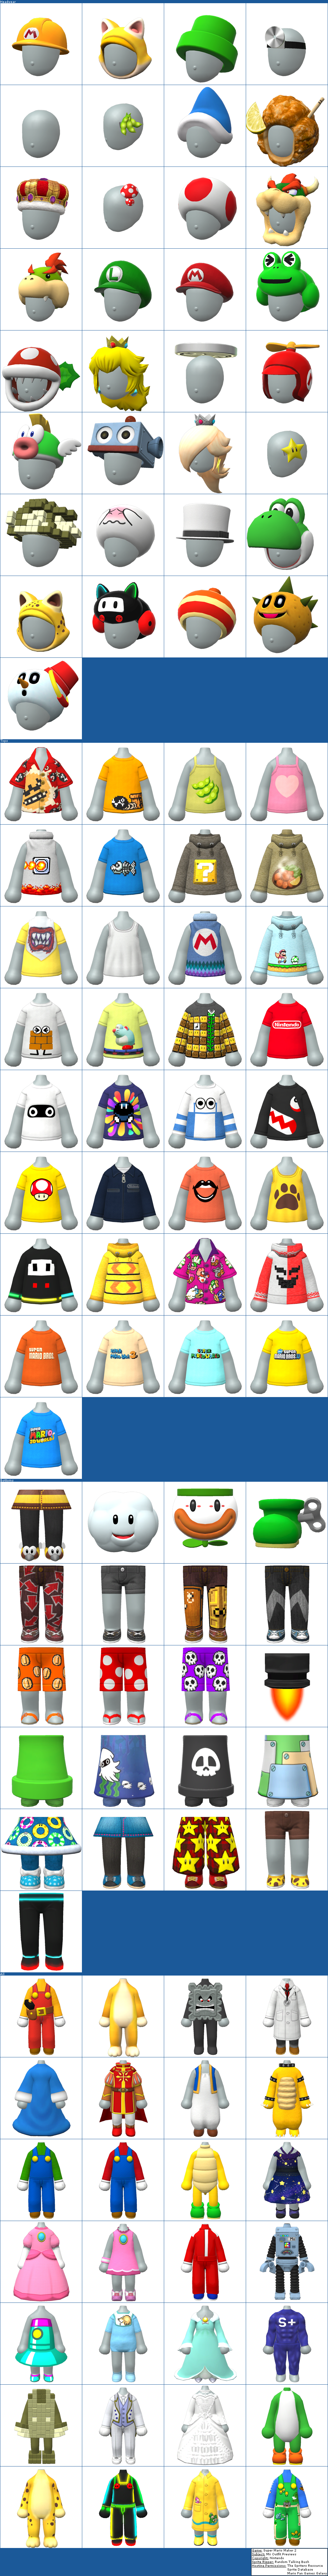 Mii Outfit Previews